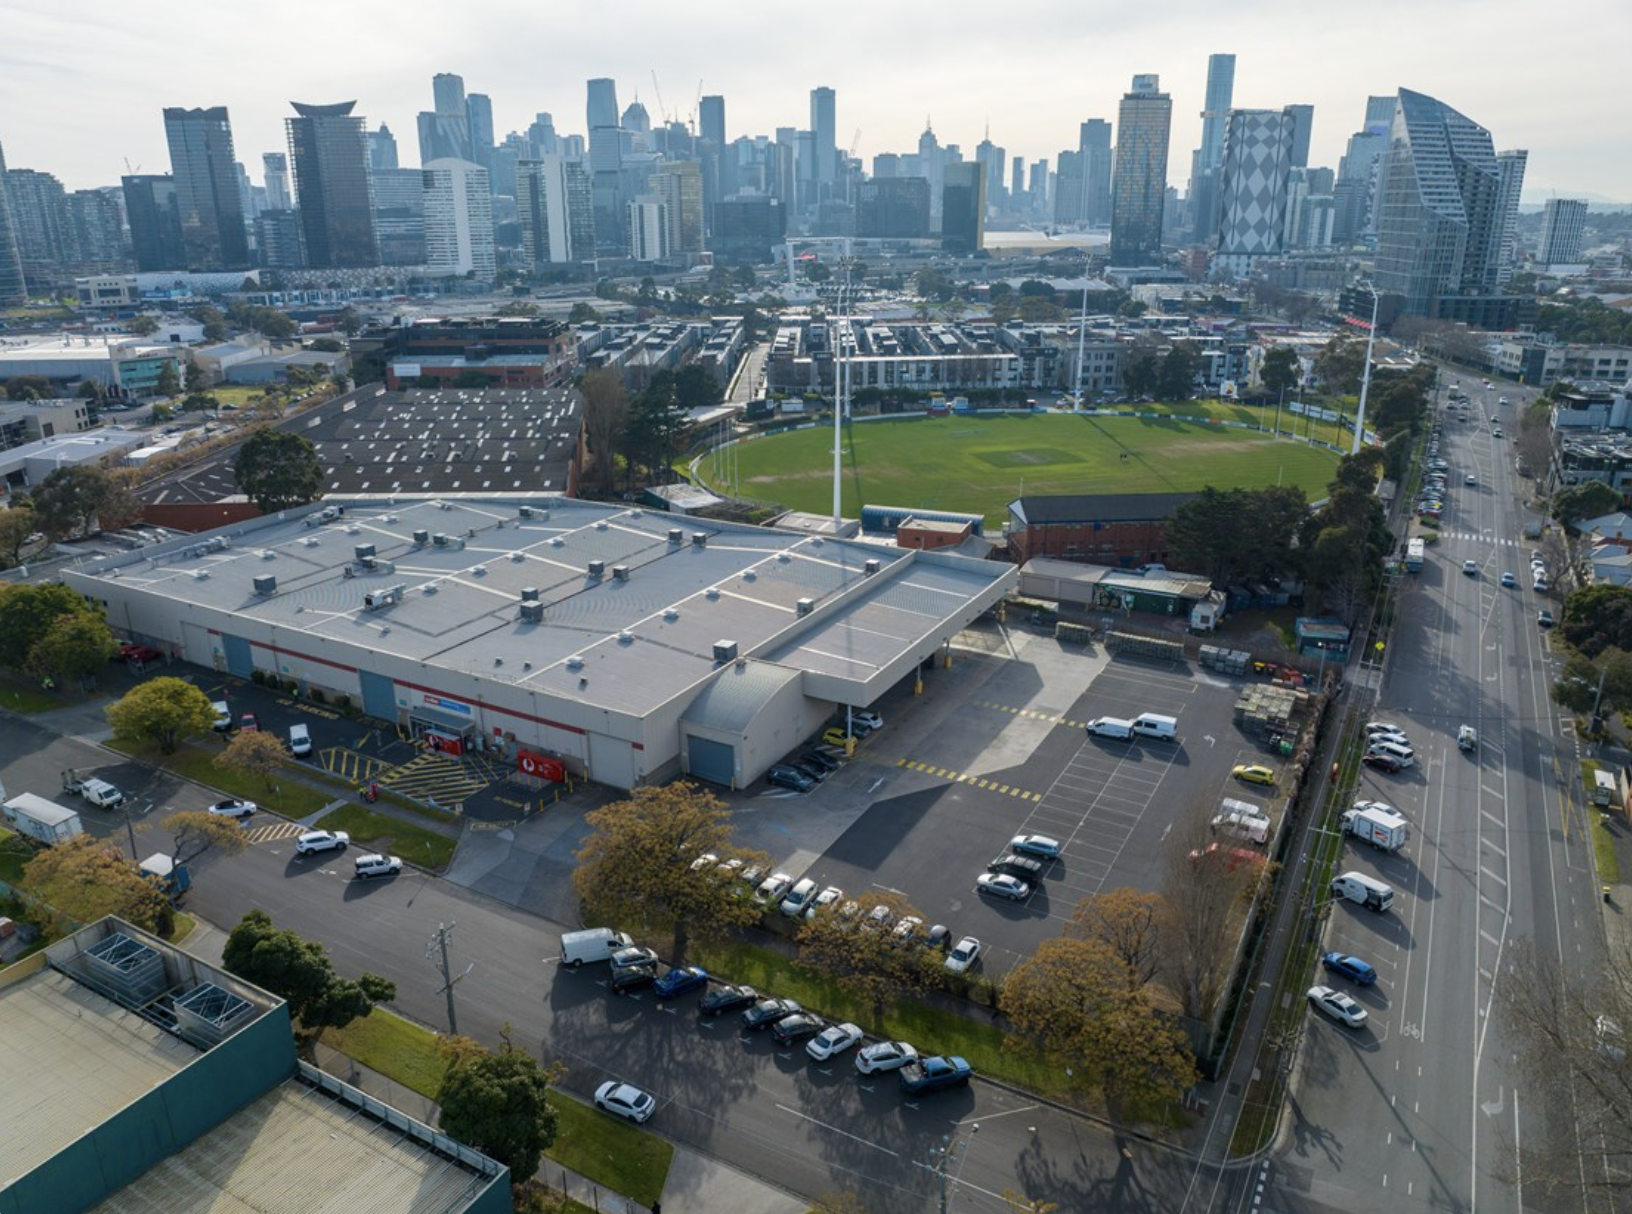 Aerial view of Fishermans Bend featuring industrial buildings, a sports ground, suburbs, all the way to the Melbourne skyline during the day